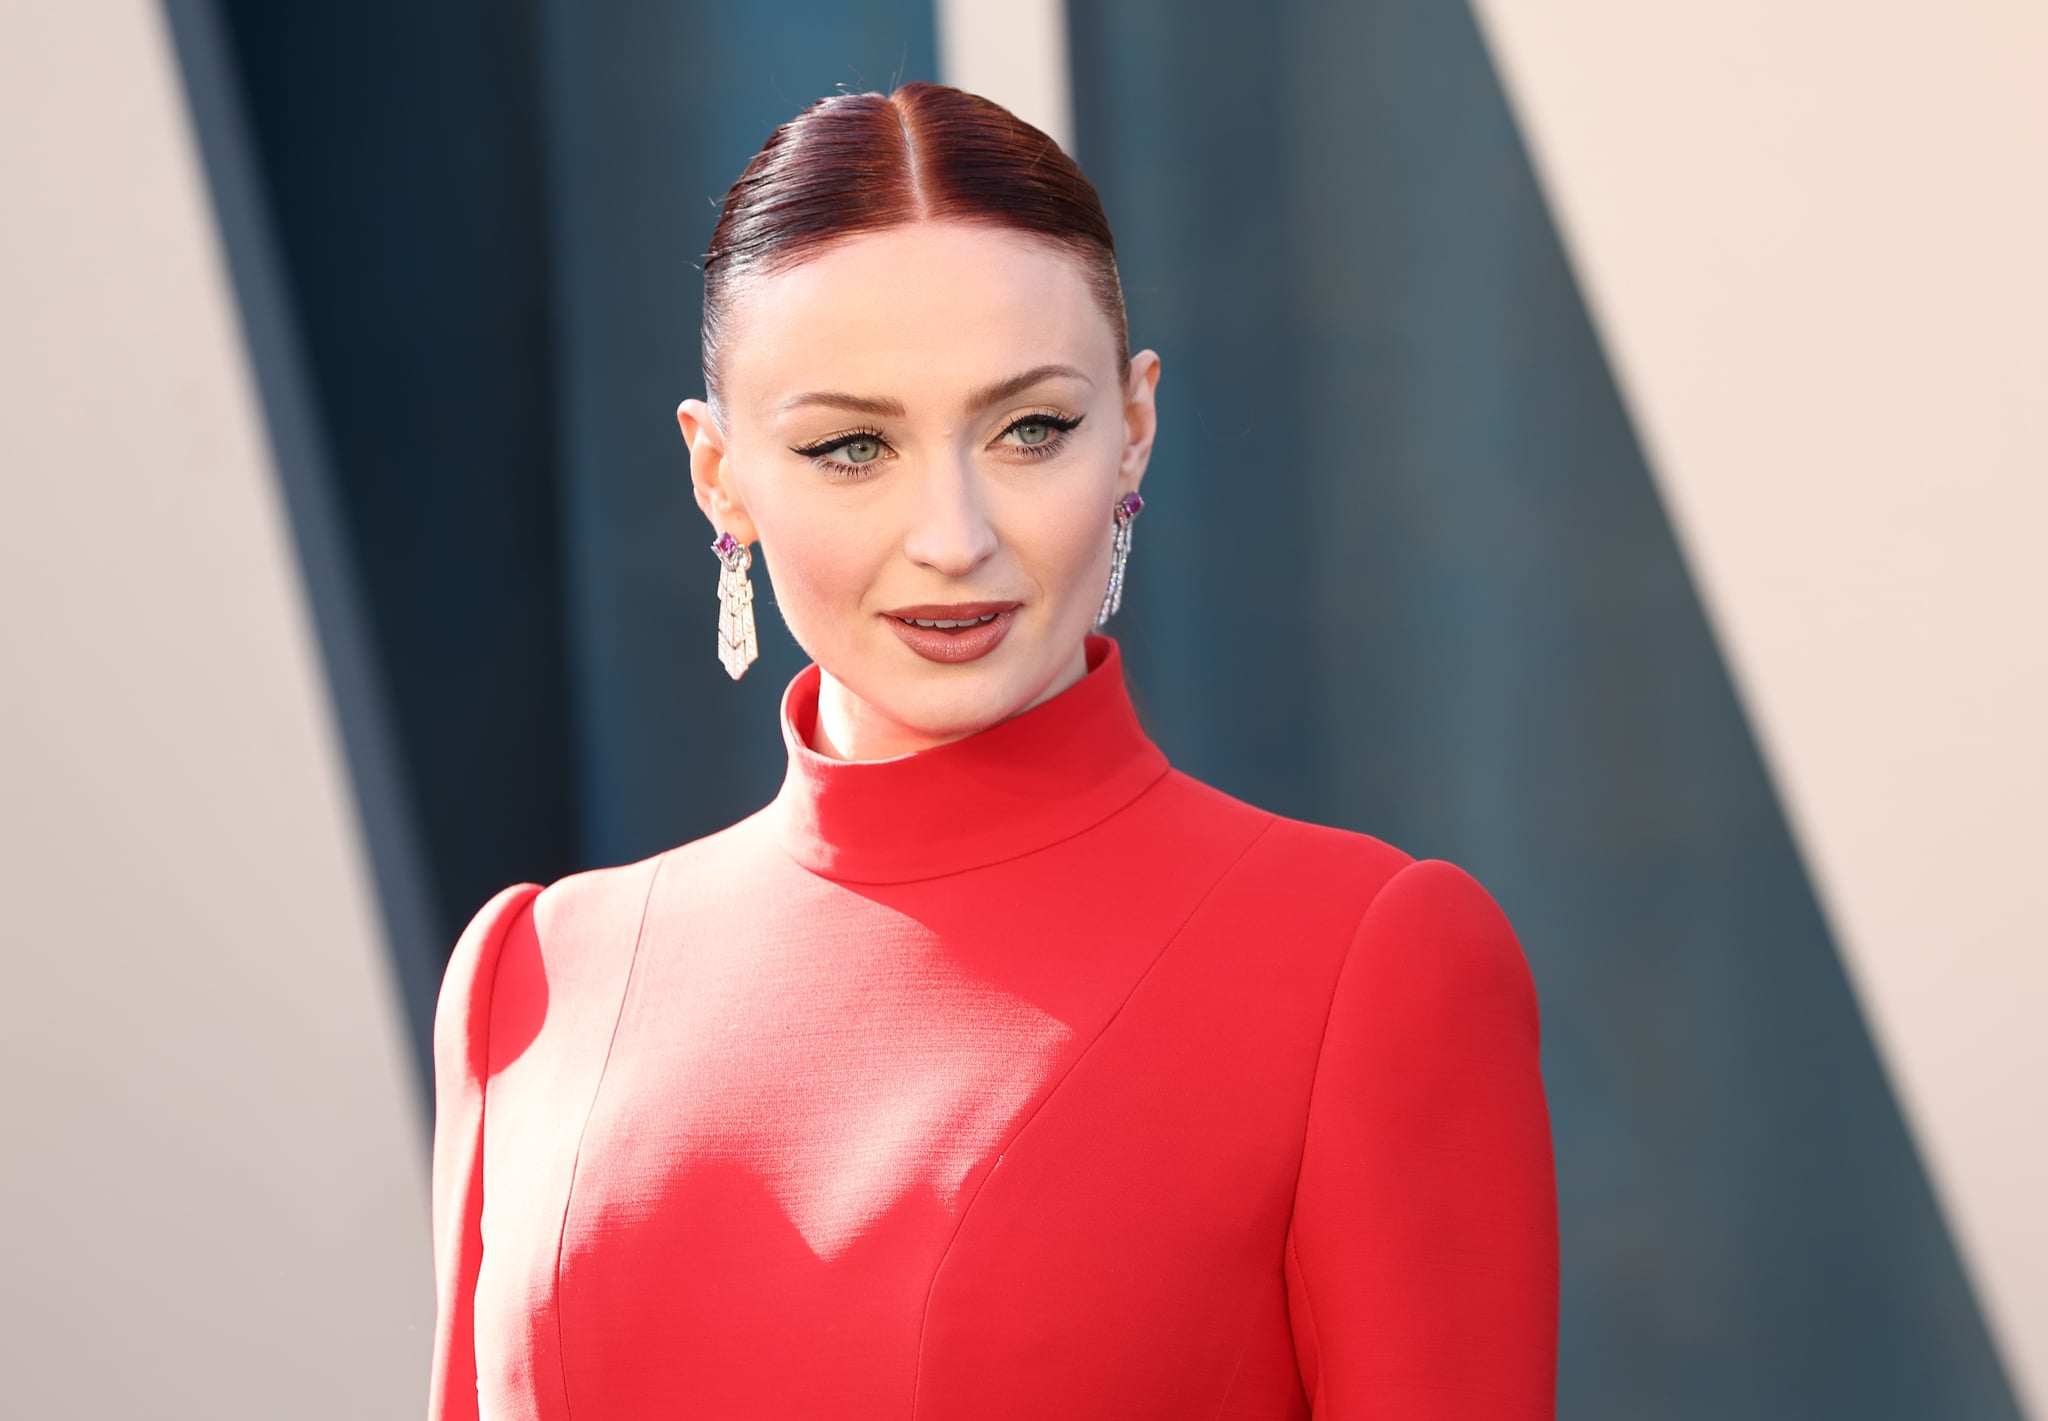 BEVERLY HILLS, CALIFORNIA - MARCH 27: Sophie Turner attends the 2022 Vanity Fair Oscar Party hosted by Radhika Jones at Wallis Annenberg Center for the Performing Arts on March 27, 2022 in Beverly Hills, California. (Photo by Arturo Holmes/FilmMagic)